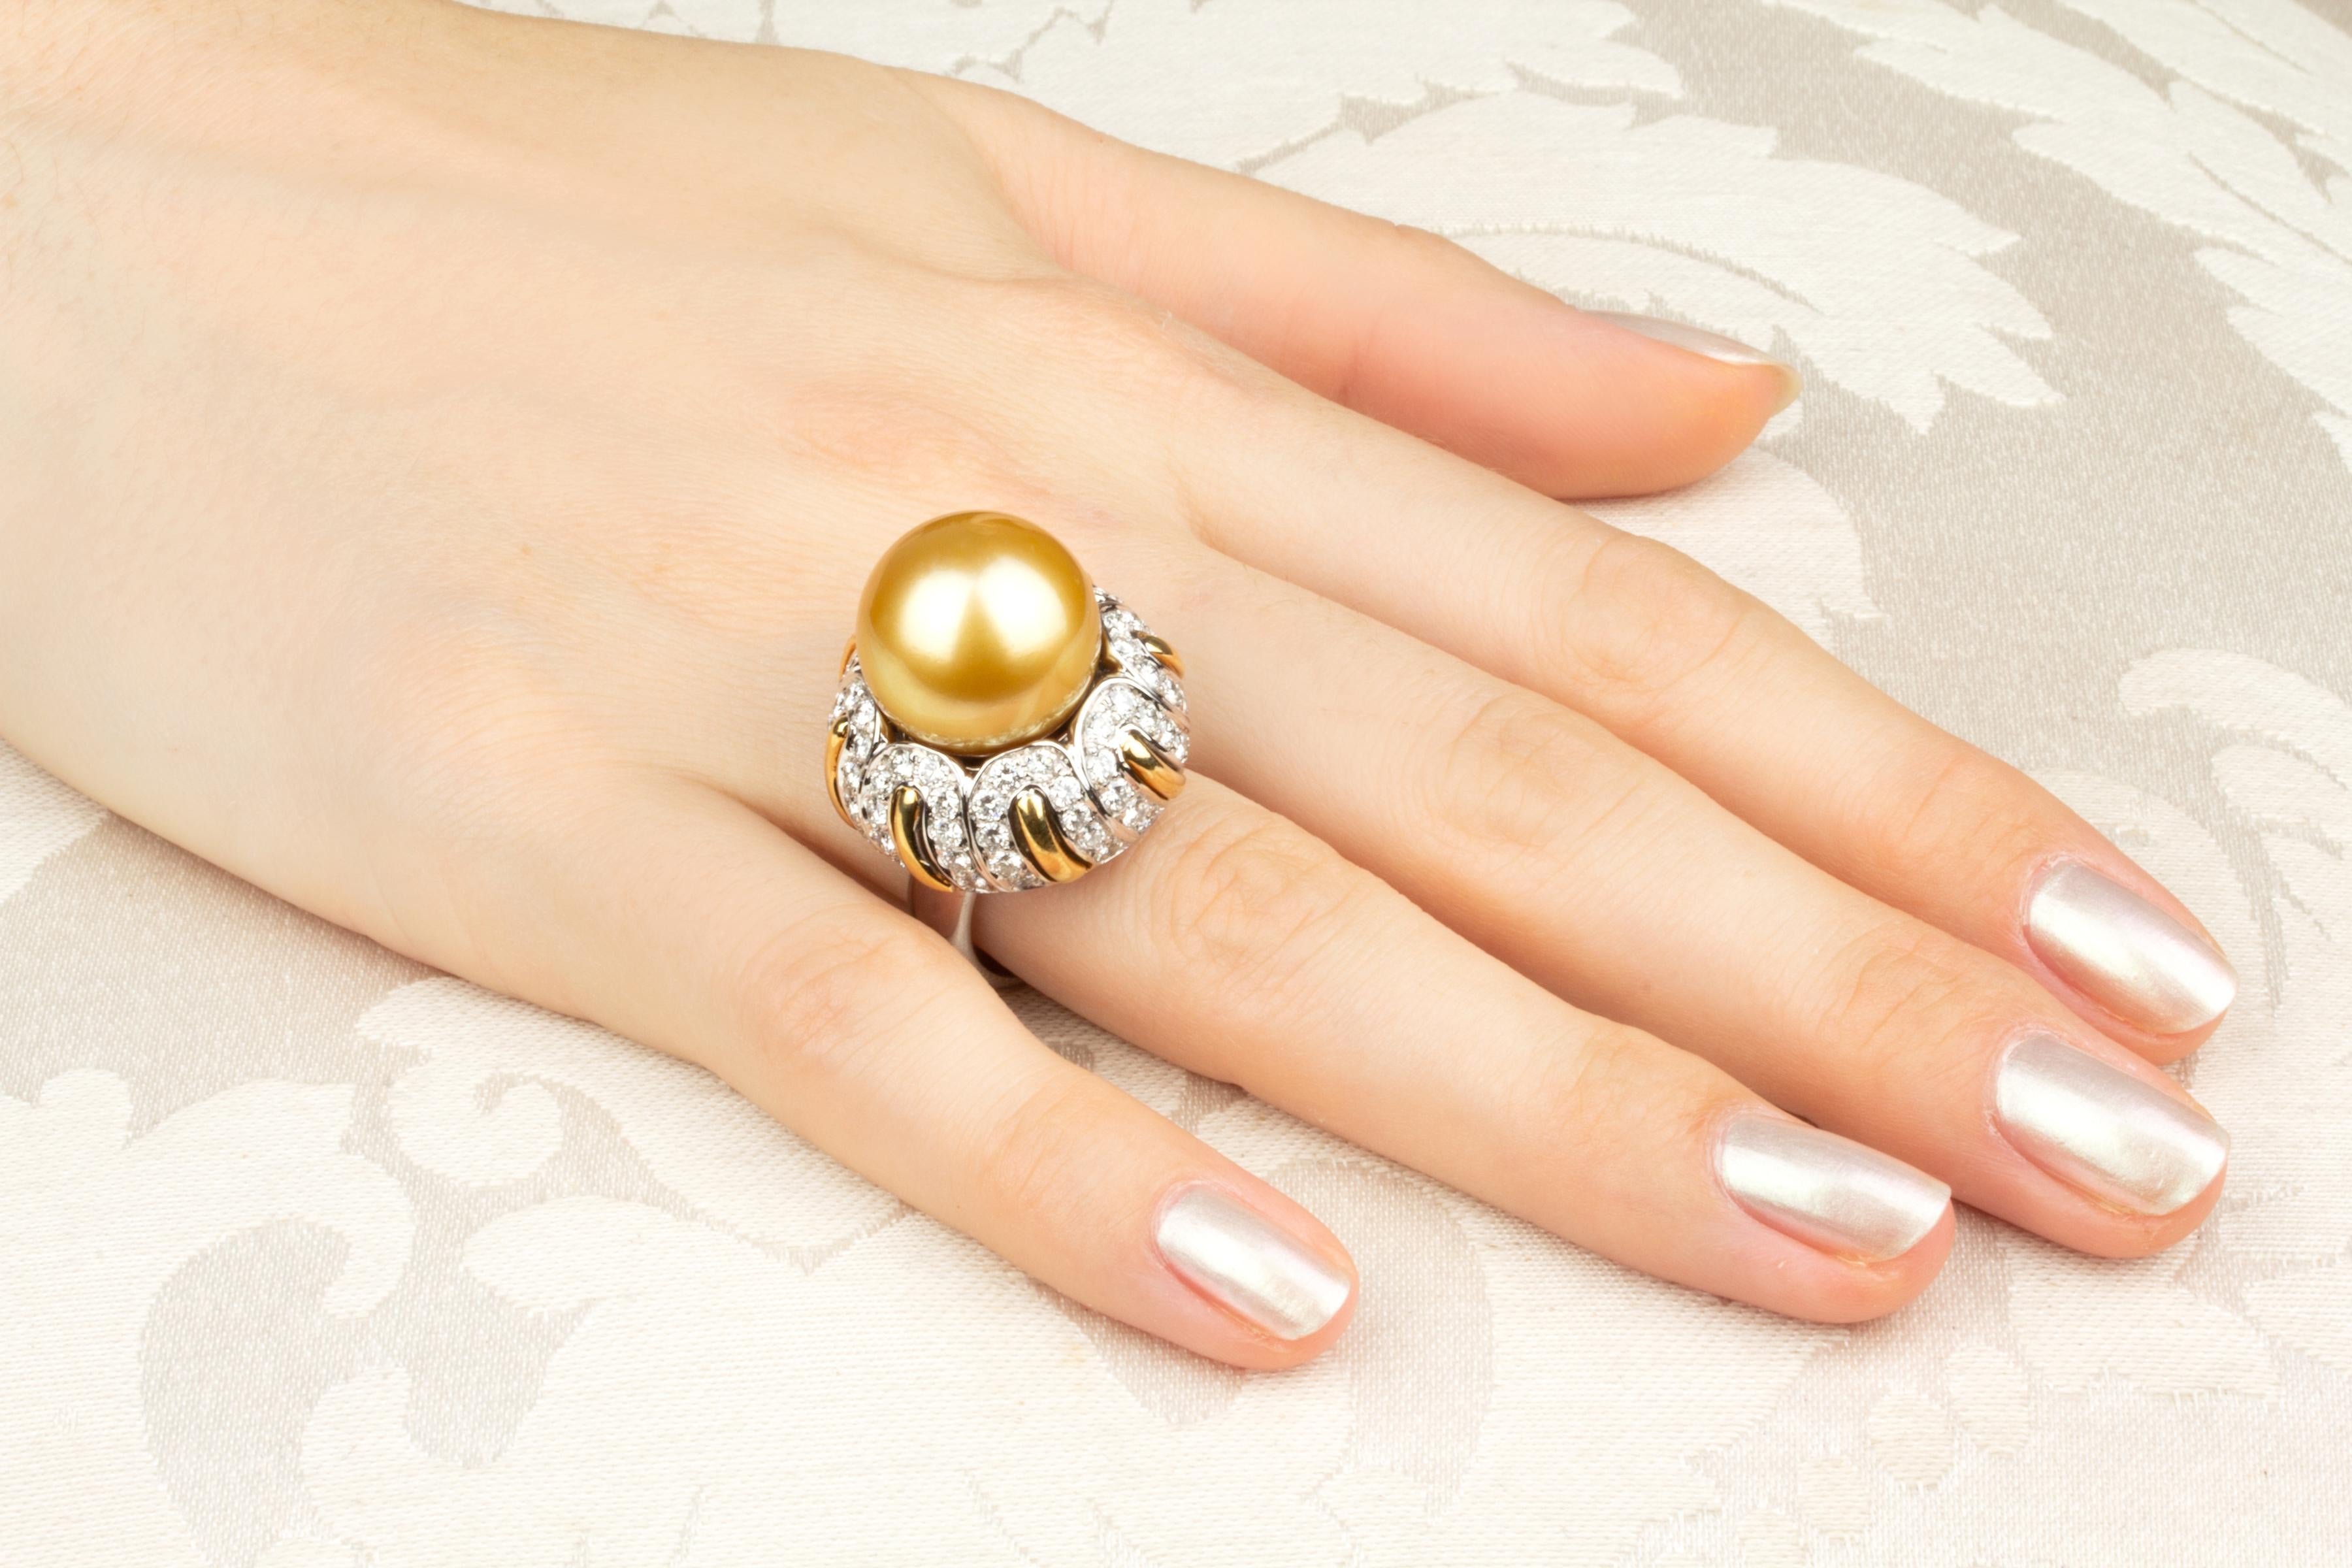 This pearl and diamond ring features a splendid pearl of 16mm diameter. The pearl is untreated. It displays fine nacre and its natural color and luster have not been enhanced in any way. The pearl is perched on a crown of 2.60 carats of round